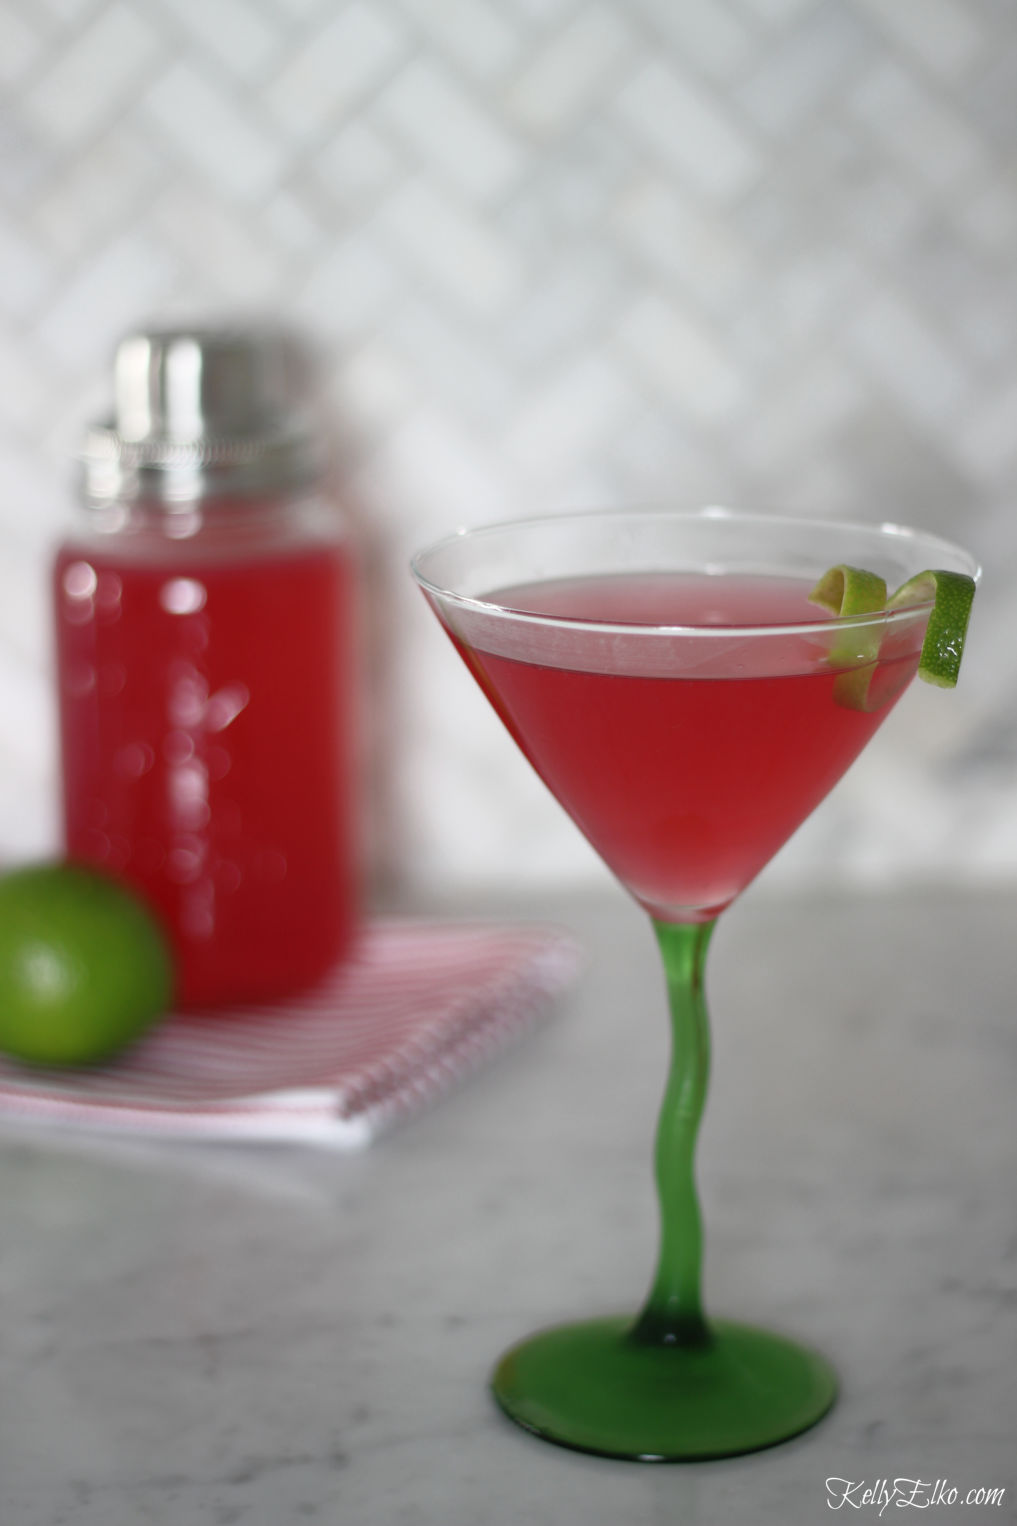 The Ultimate Cosmopolitan Cocktail Recipe kellyelko.com #cocktails #cosmopolitan #cocktailrecipes #cocktail #partydrinks #partyfood #partyrecipes